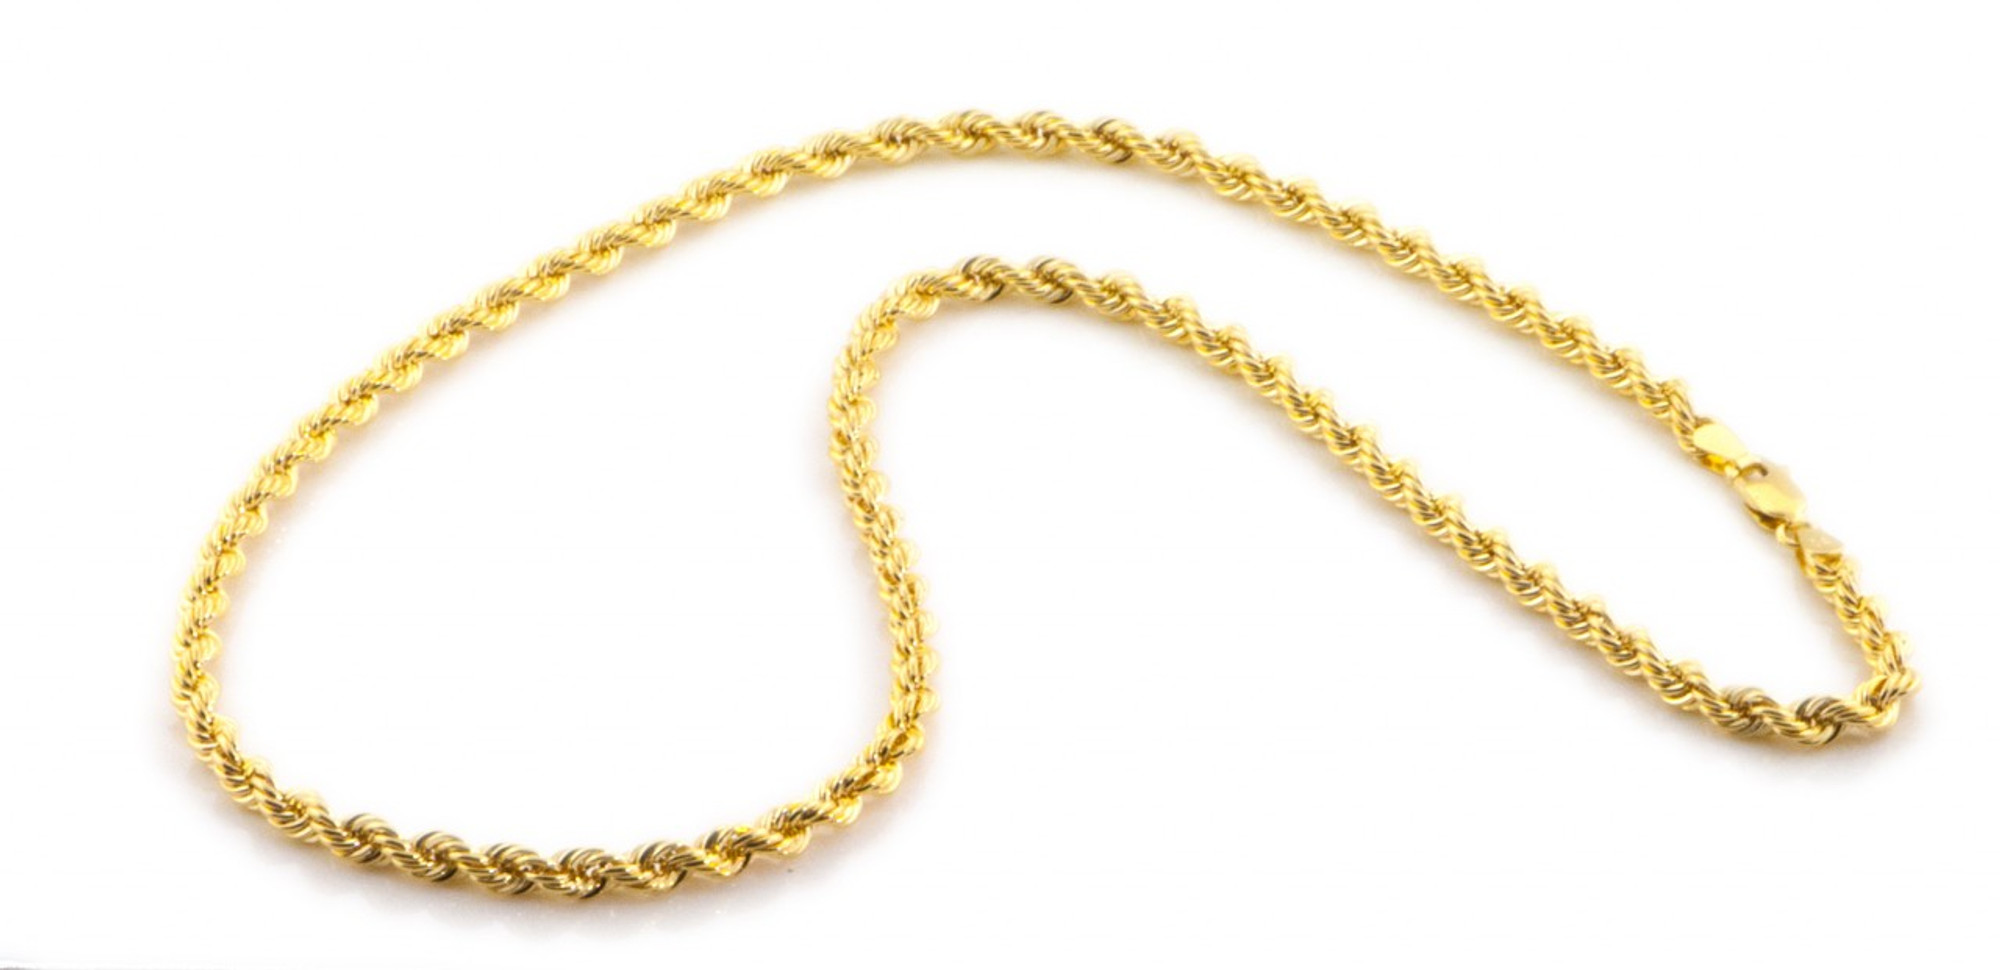 14K Yellow Gold 5mm Hollow Rope Chain 24 Inches